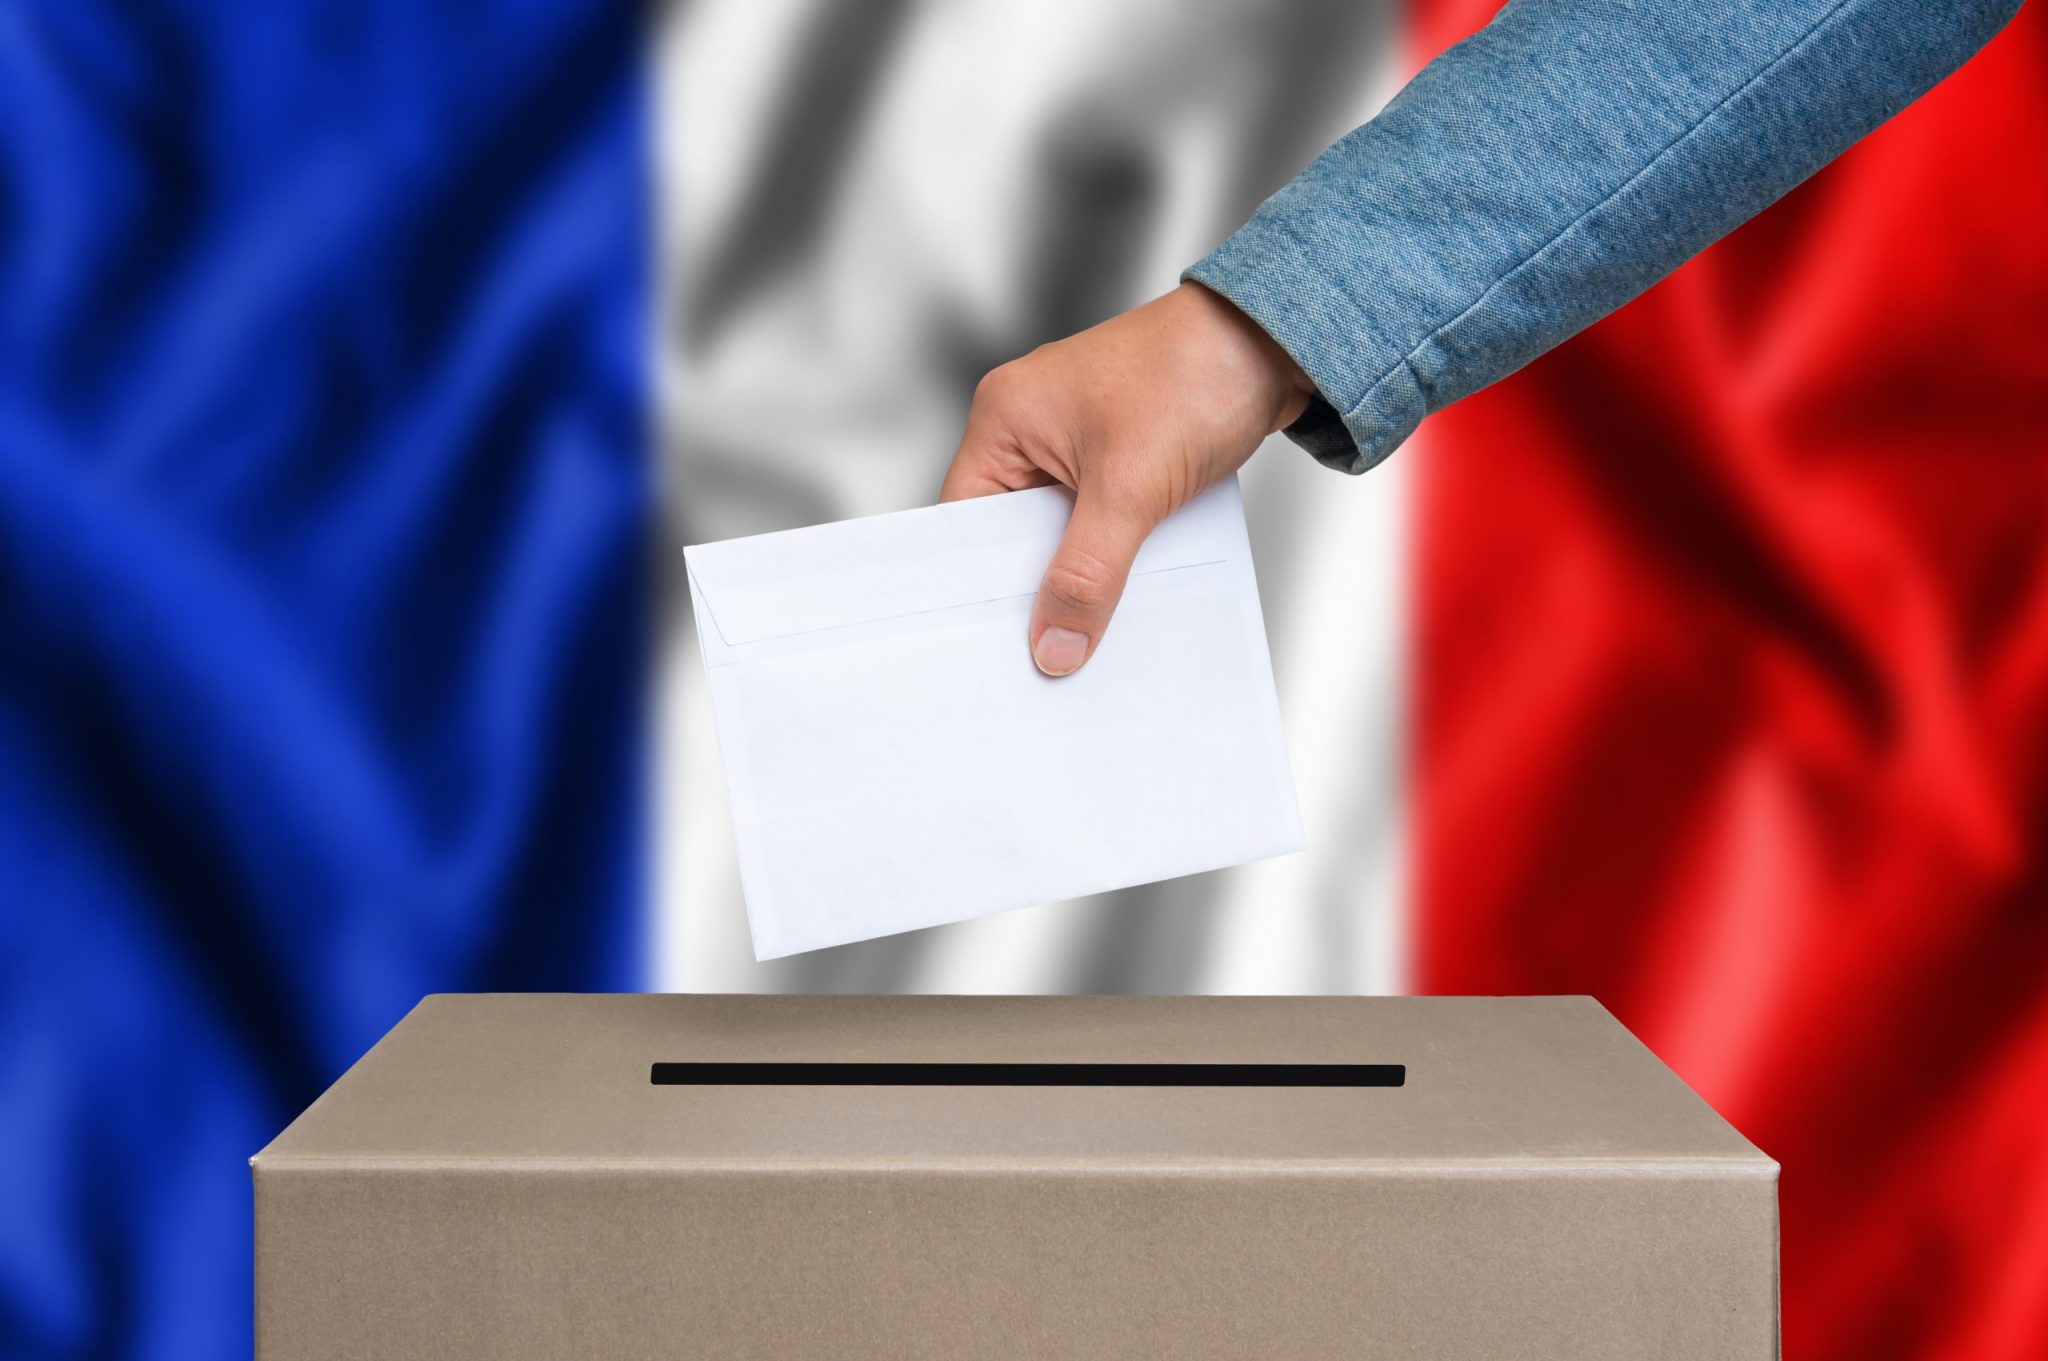 Election in France. The hand of woman putting her vote in the ballot box. French flag on background.